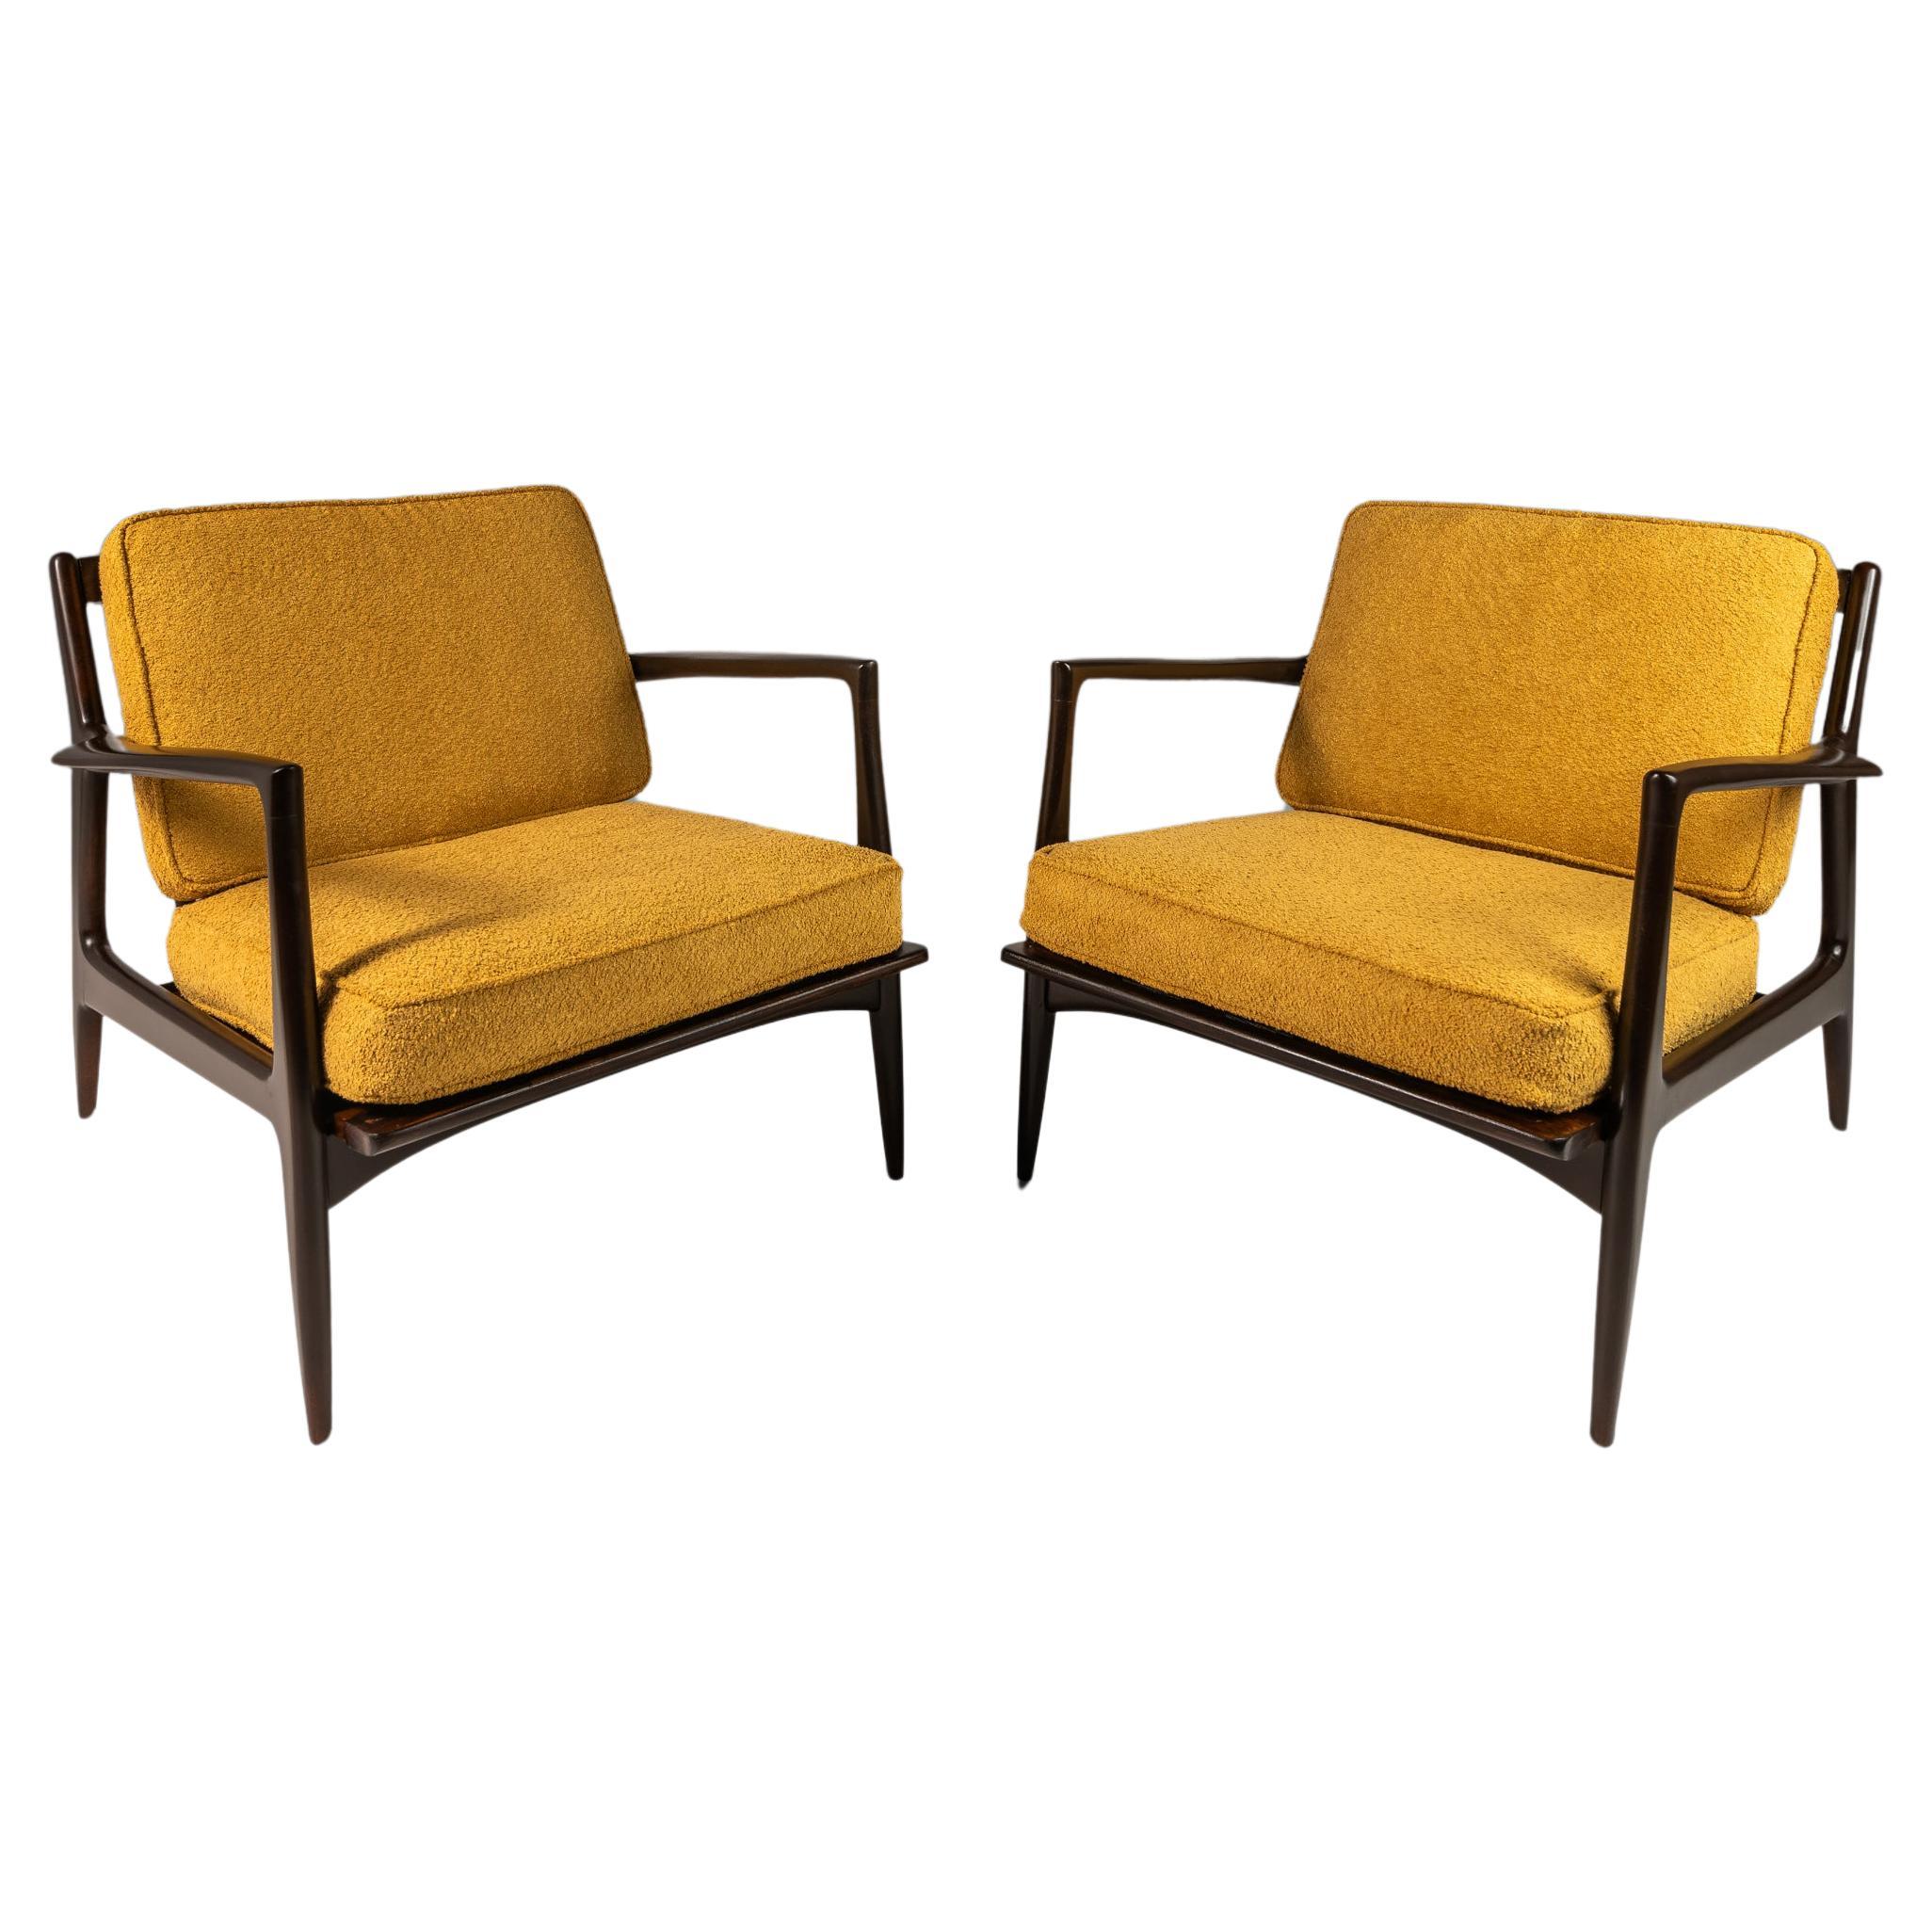 Set of 2 'Blade Arm' Lounge Chairs by Ib Kofod Larsen for Selig, Denmark, 1960's